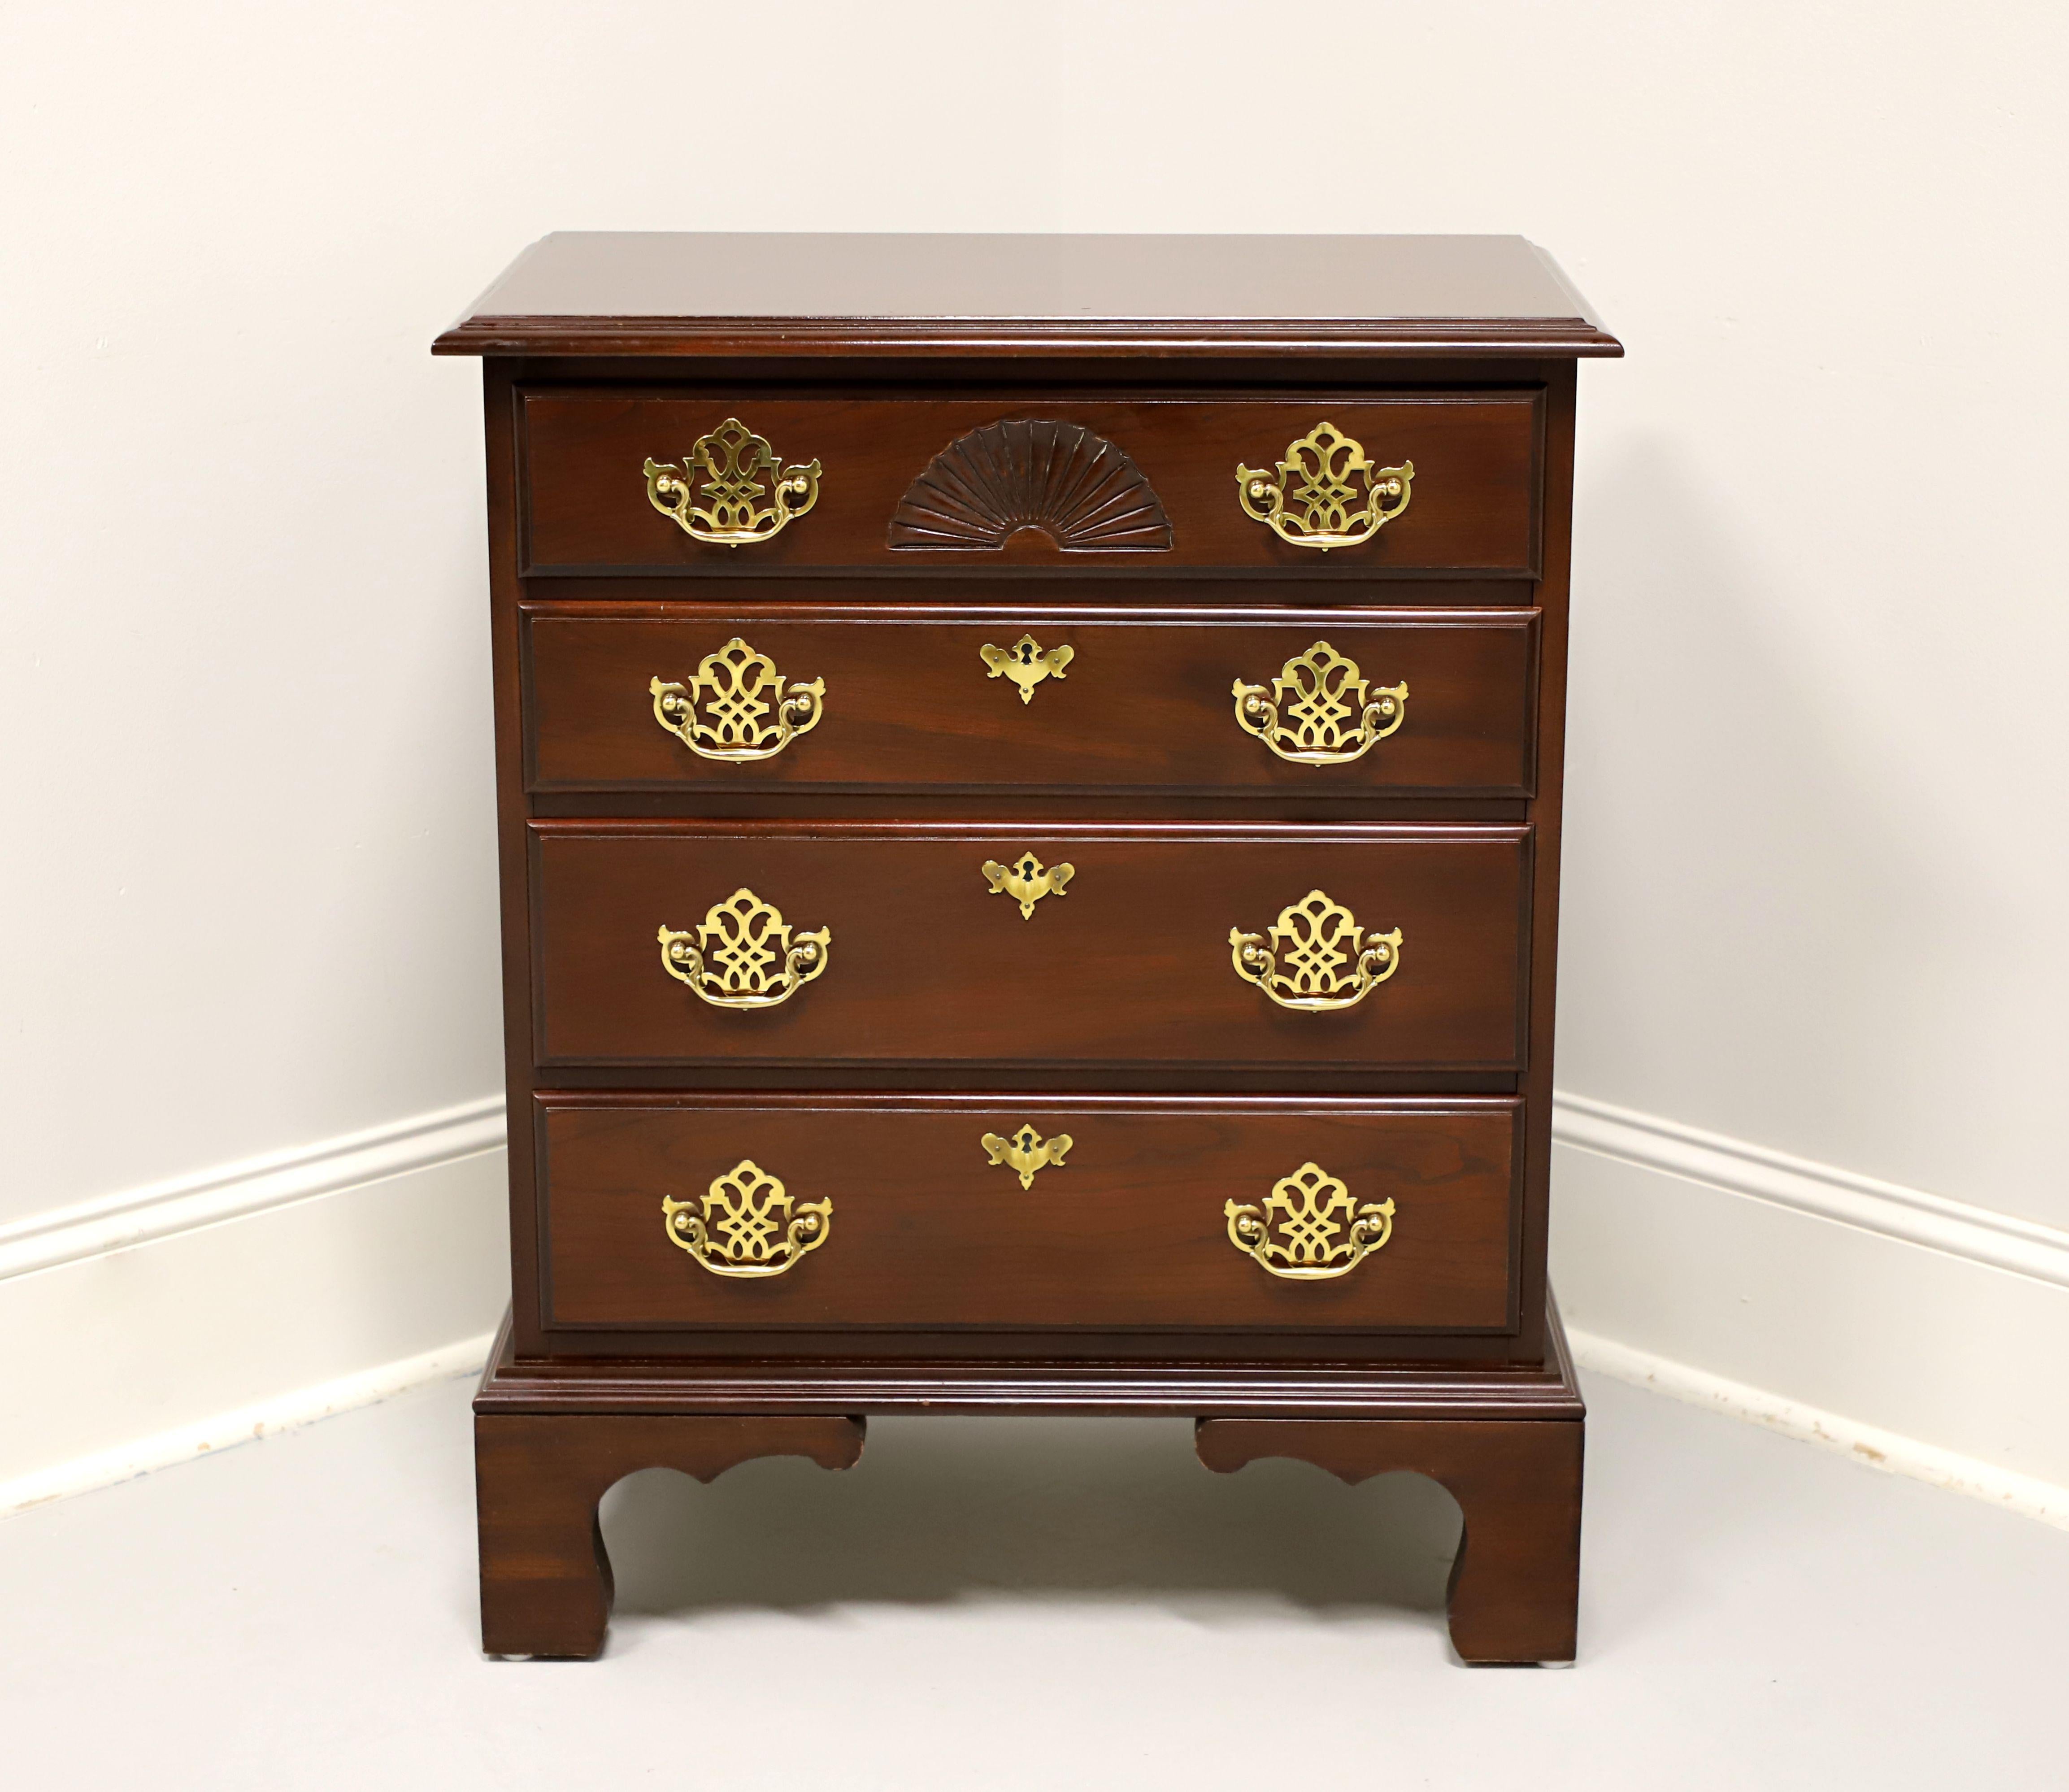 A Chippendale style bedside chest by Harden Furniture. Cherry wood with brass hardware, bevel edge to the top, and bracket feet. Features four drawers of dovetail construction, top drawer having a carved open fan and three lower drawers with faux